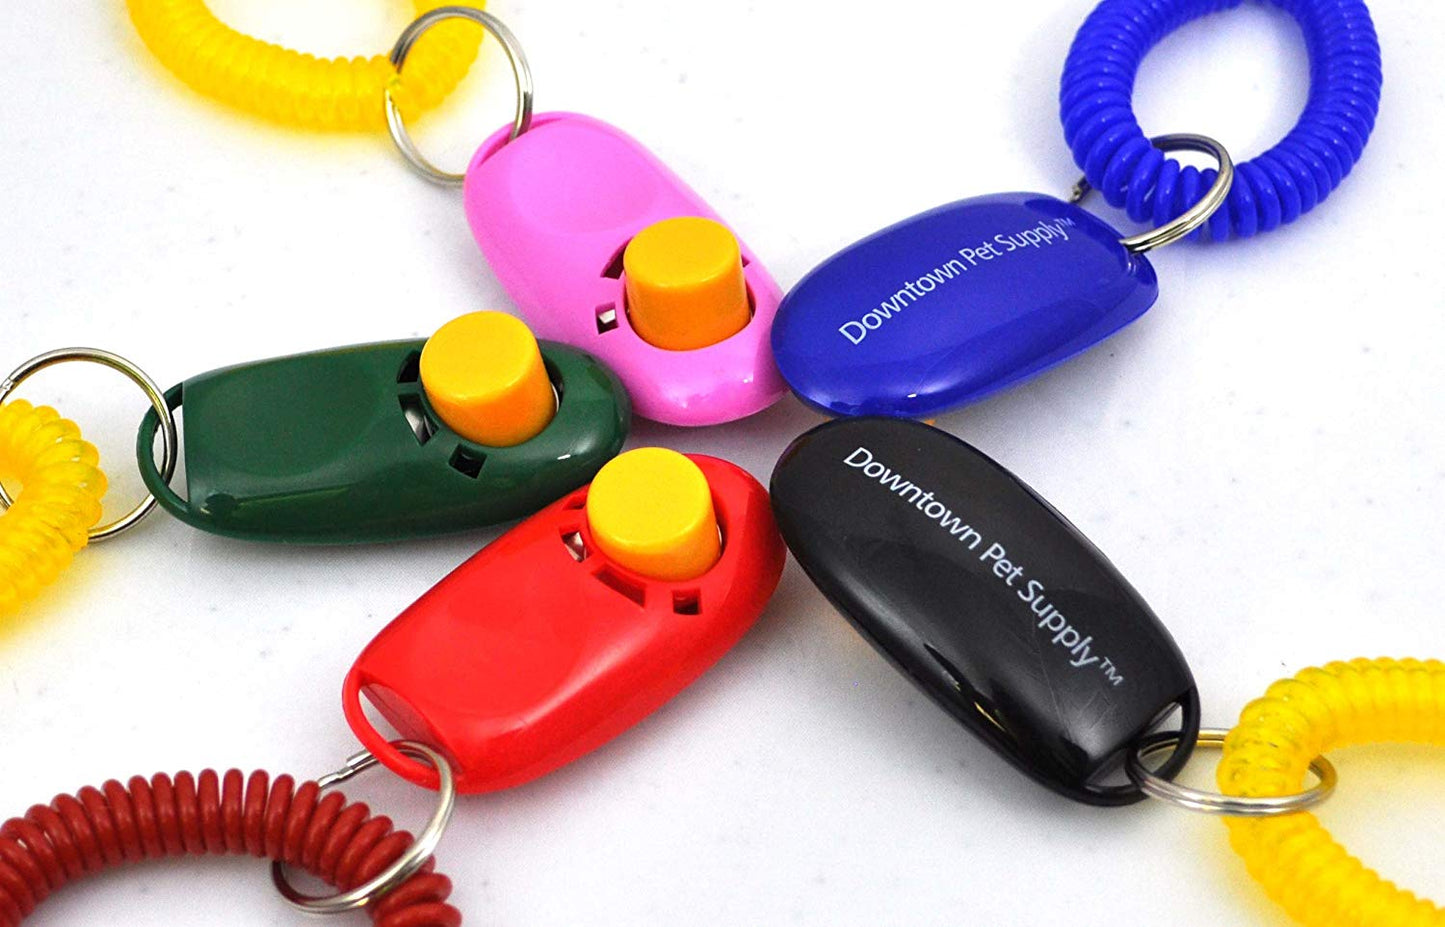 Dog Clicker for Training with Wrist Band - Multi-Pack Options